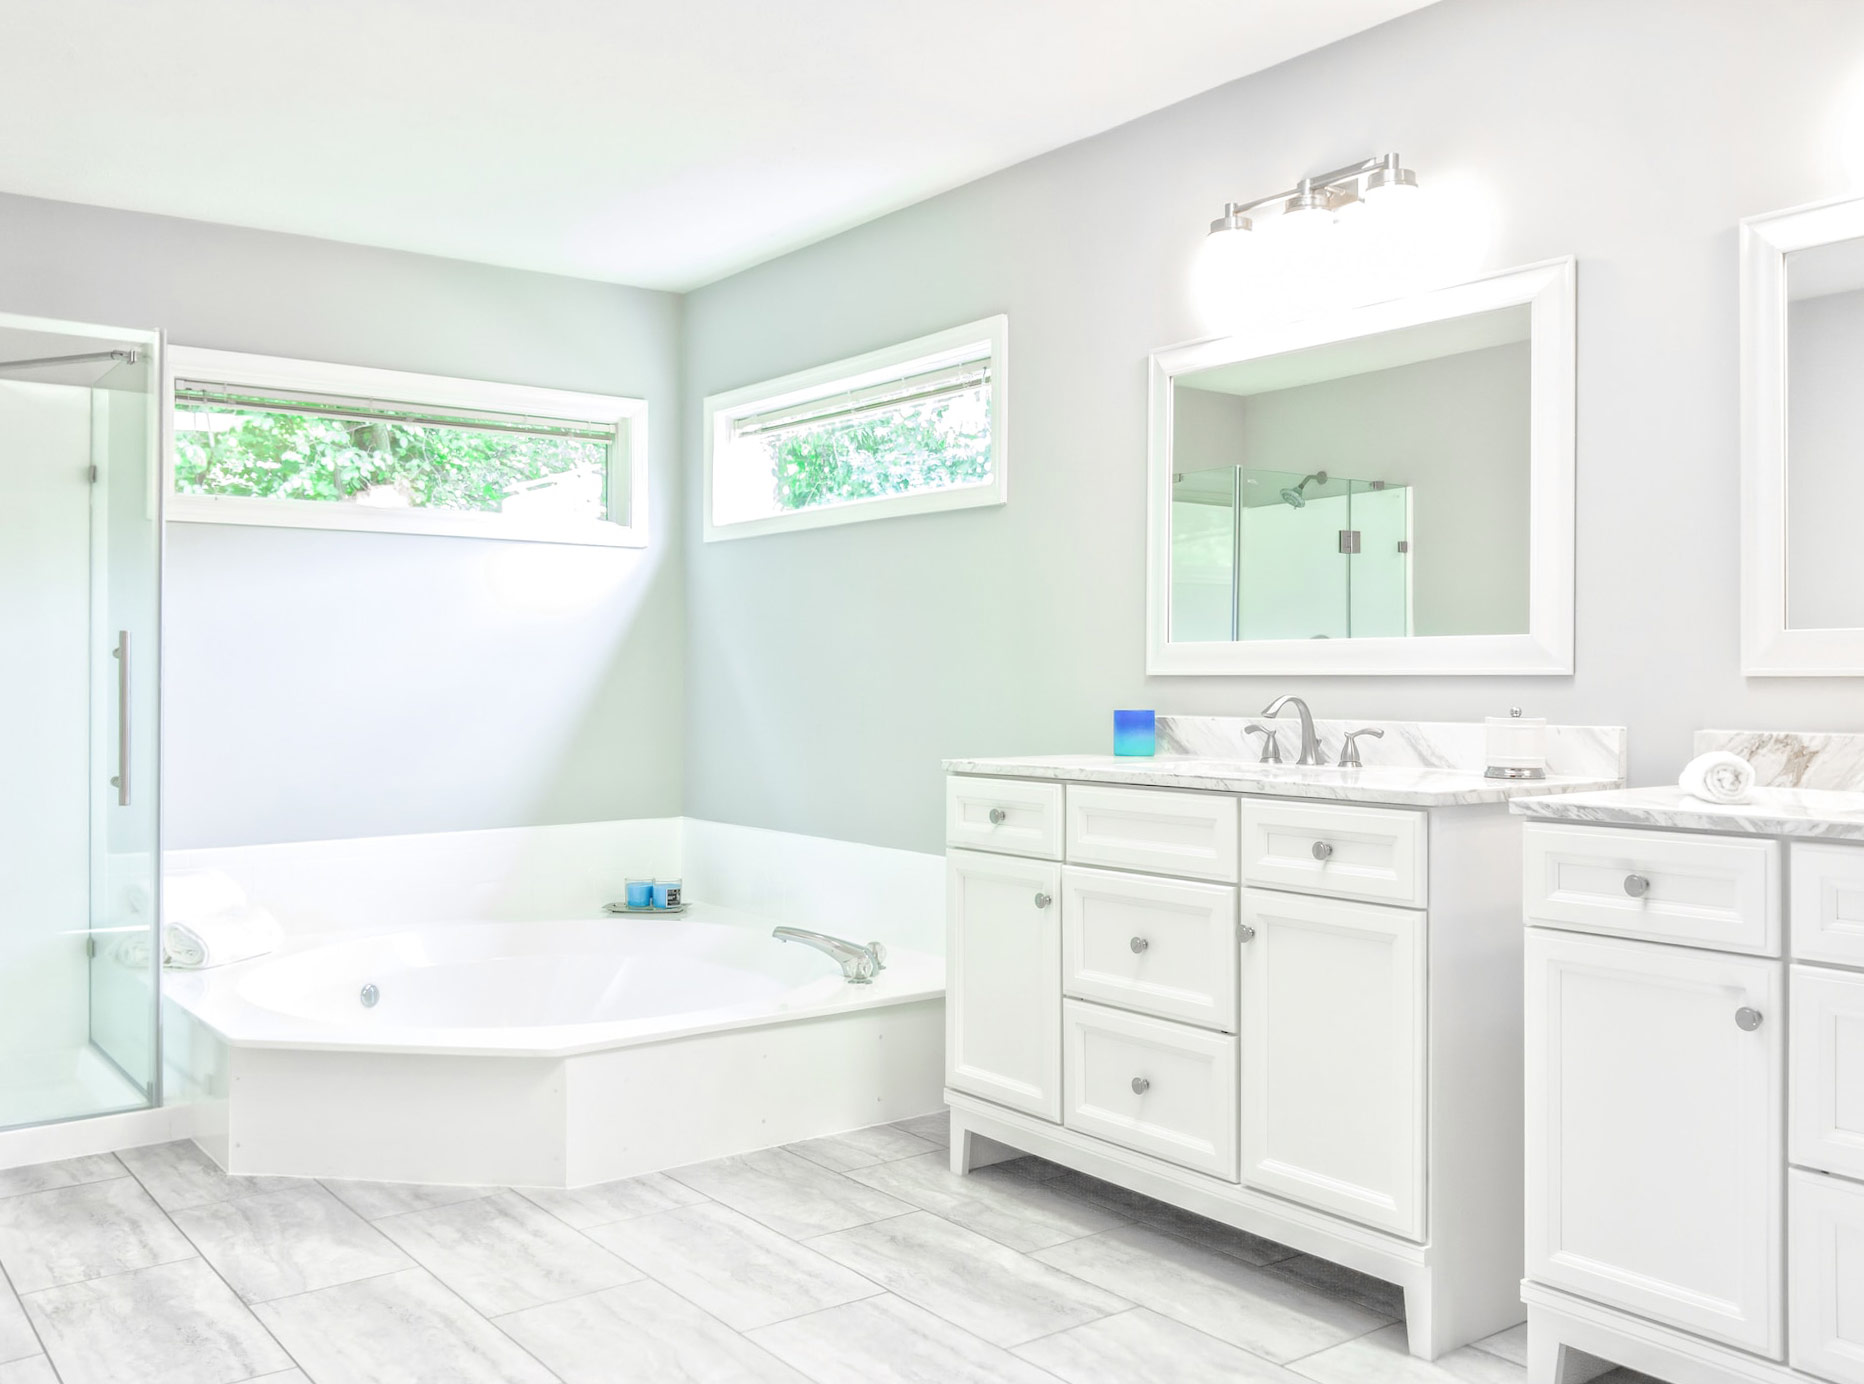 Light bathroom with horizontal narrow windows, mirrors, and white cabinets